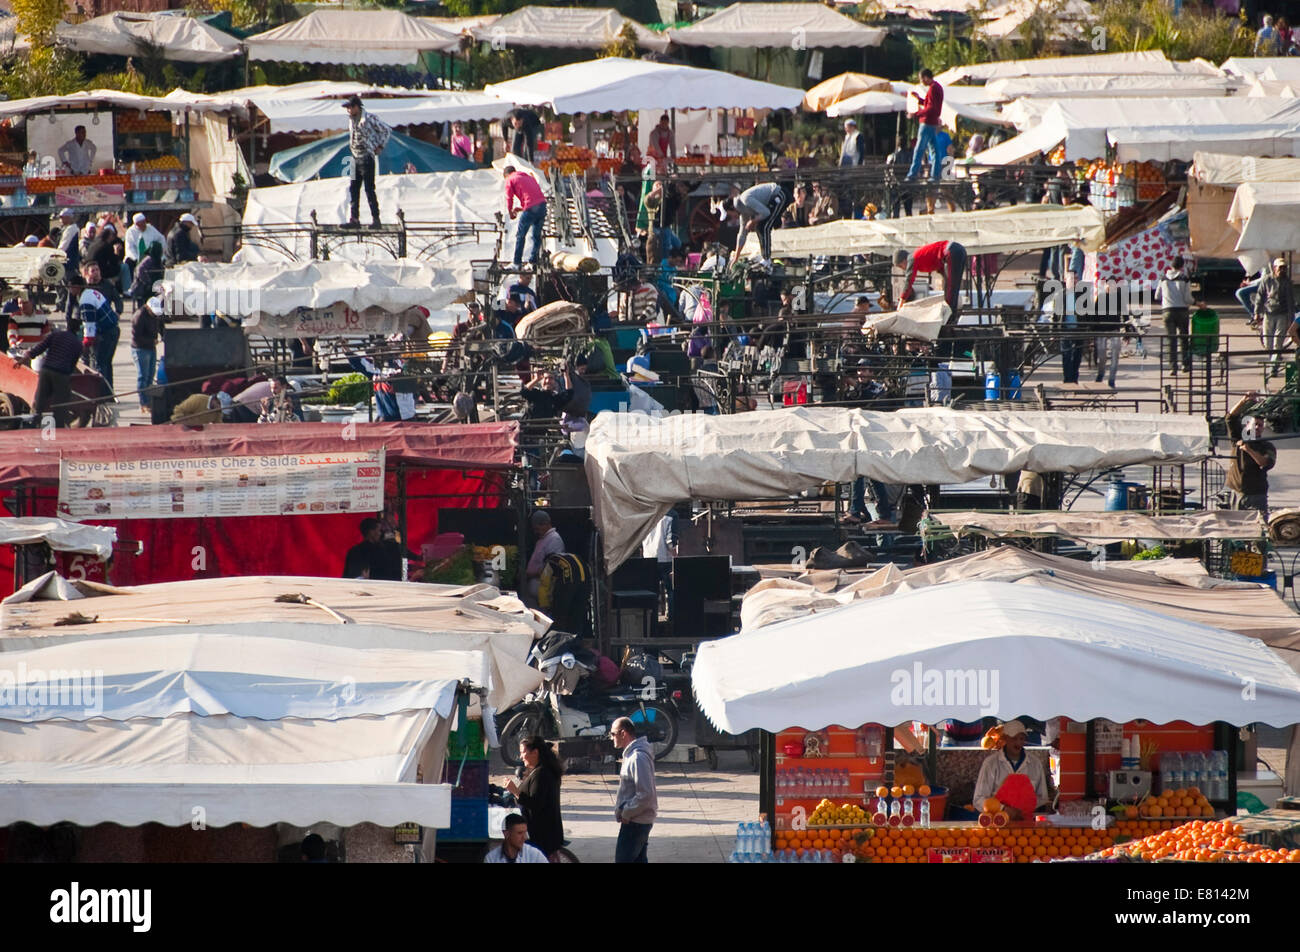 Horizontal view of food stall holders setting up in Place Jemaa el-Fnaa in Marrakech. Stock Photo